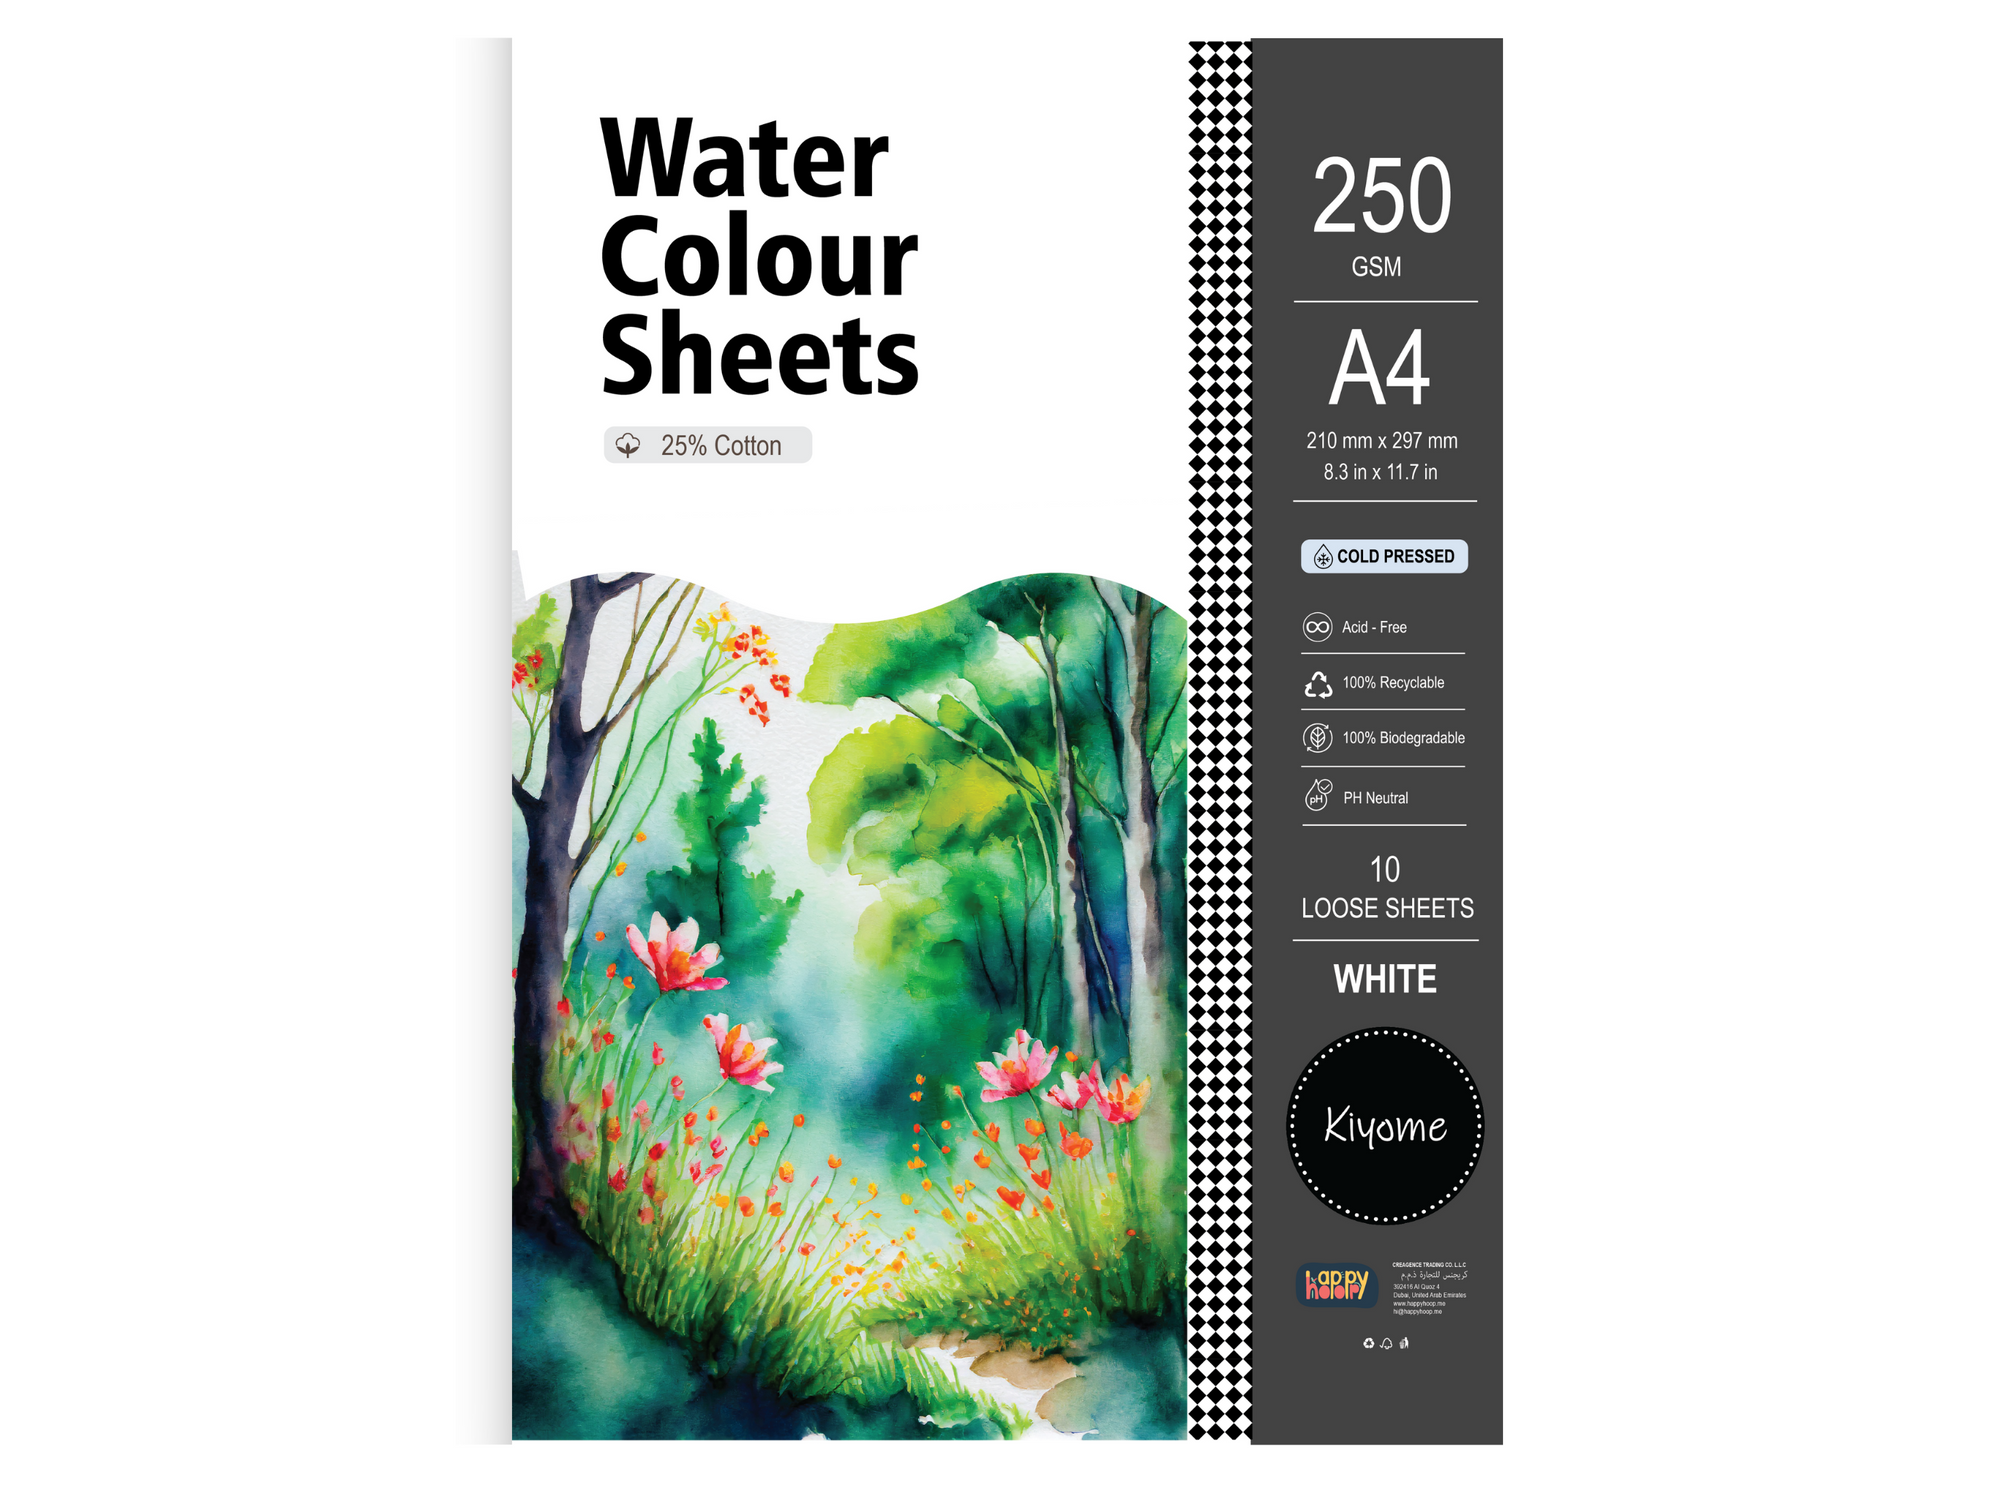 Kiyome 25% Cotton Watercolour Sheets | Cold Pressed | 250 GSM | A4 | 10 Sheets